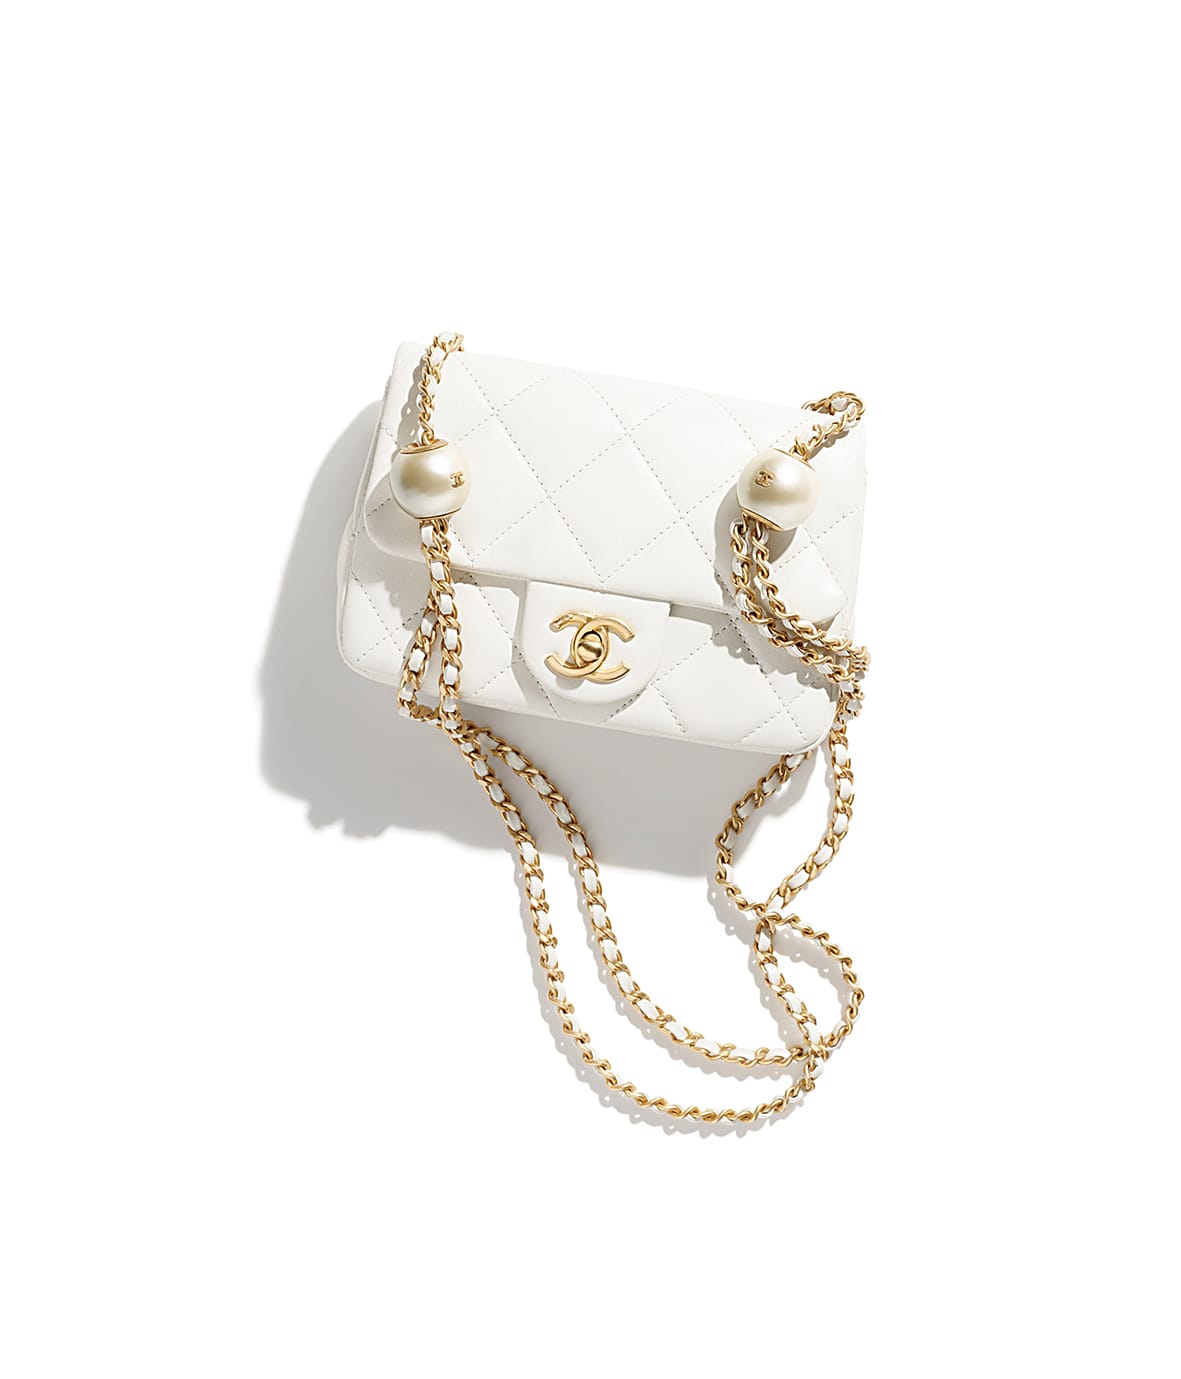 chanel bag in white leather beads and metal as4868 b16574 10601 hd yp